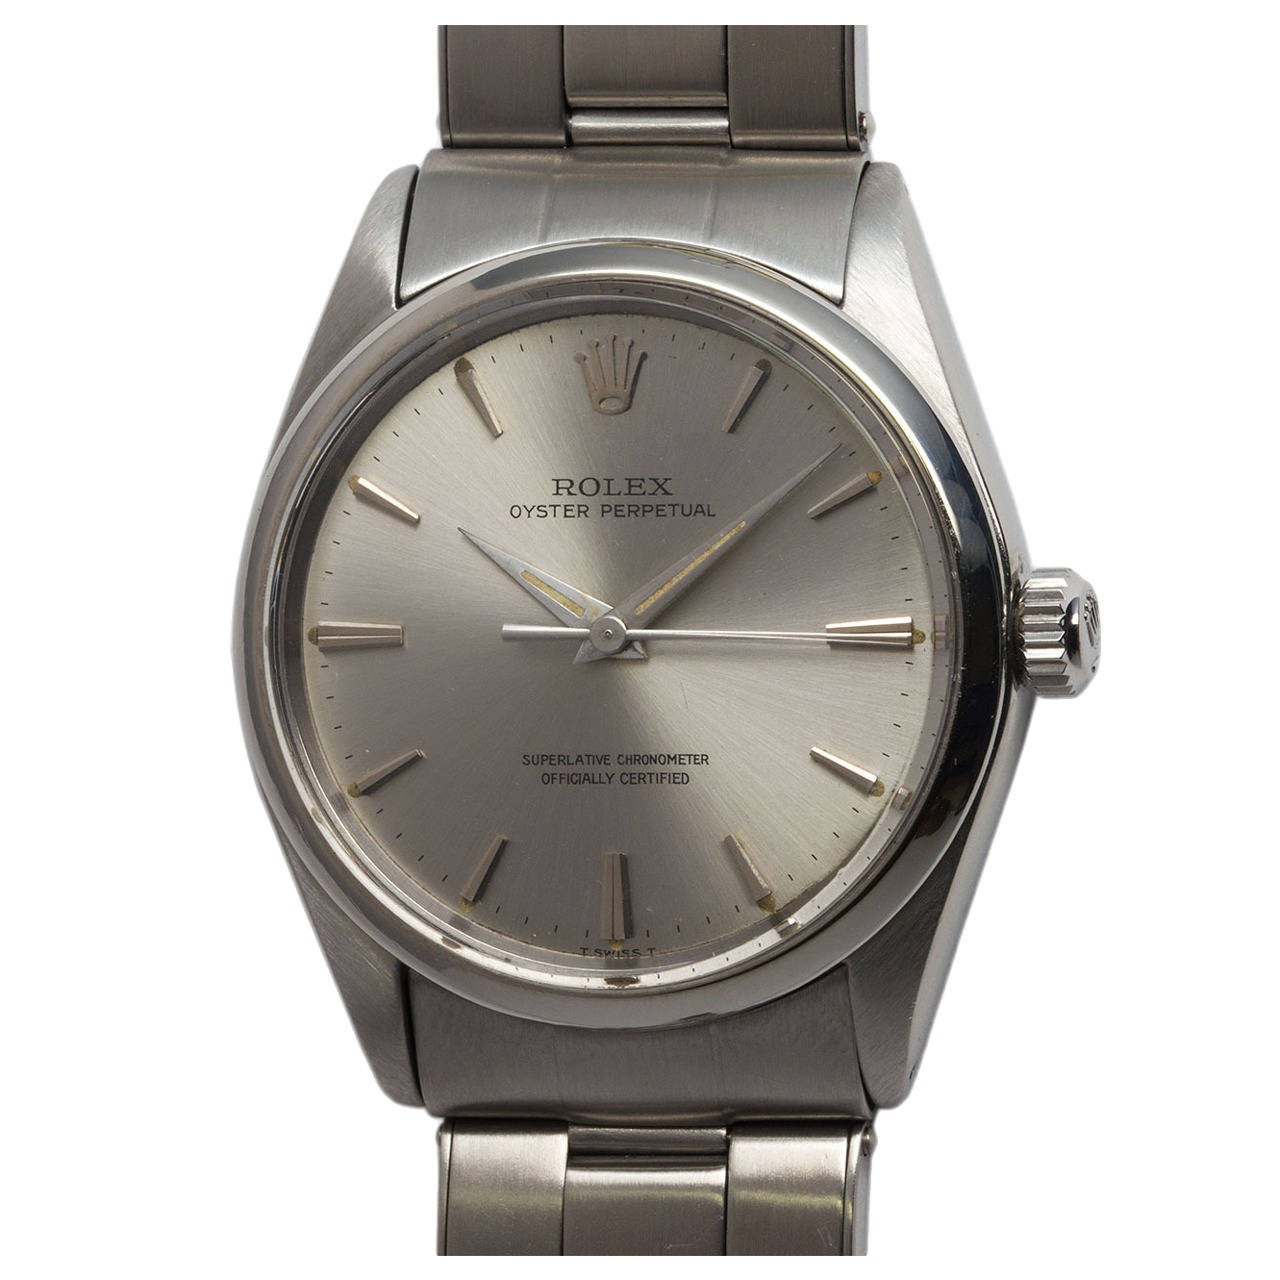 Rolex Stainless Steel Oyster Perpetual Wristwatch Ref 1002 circa 1965